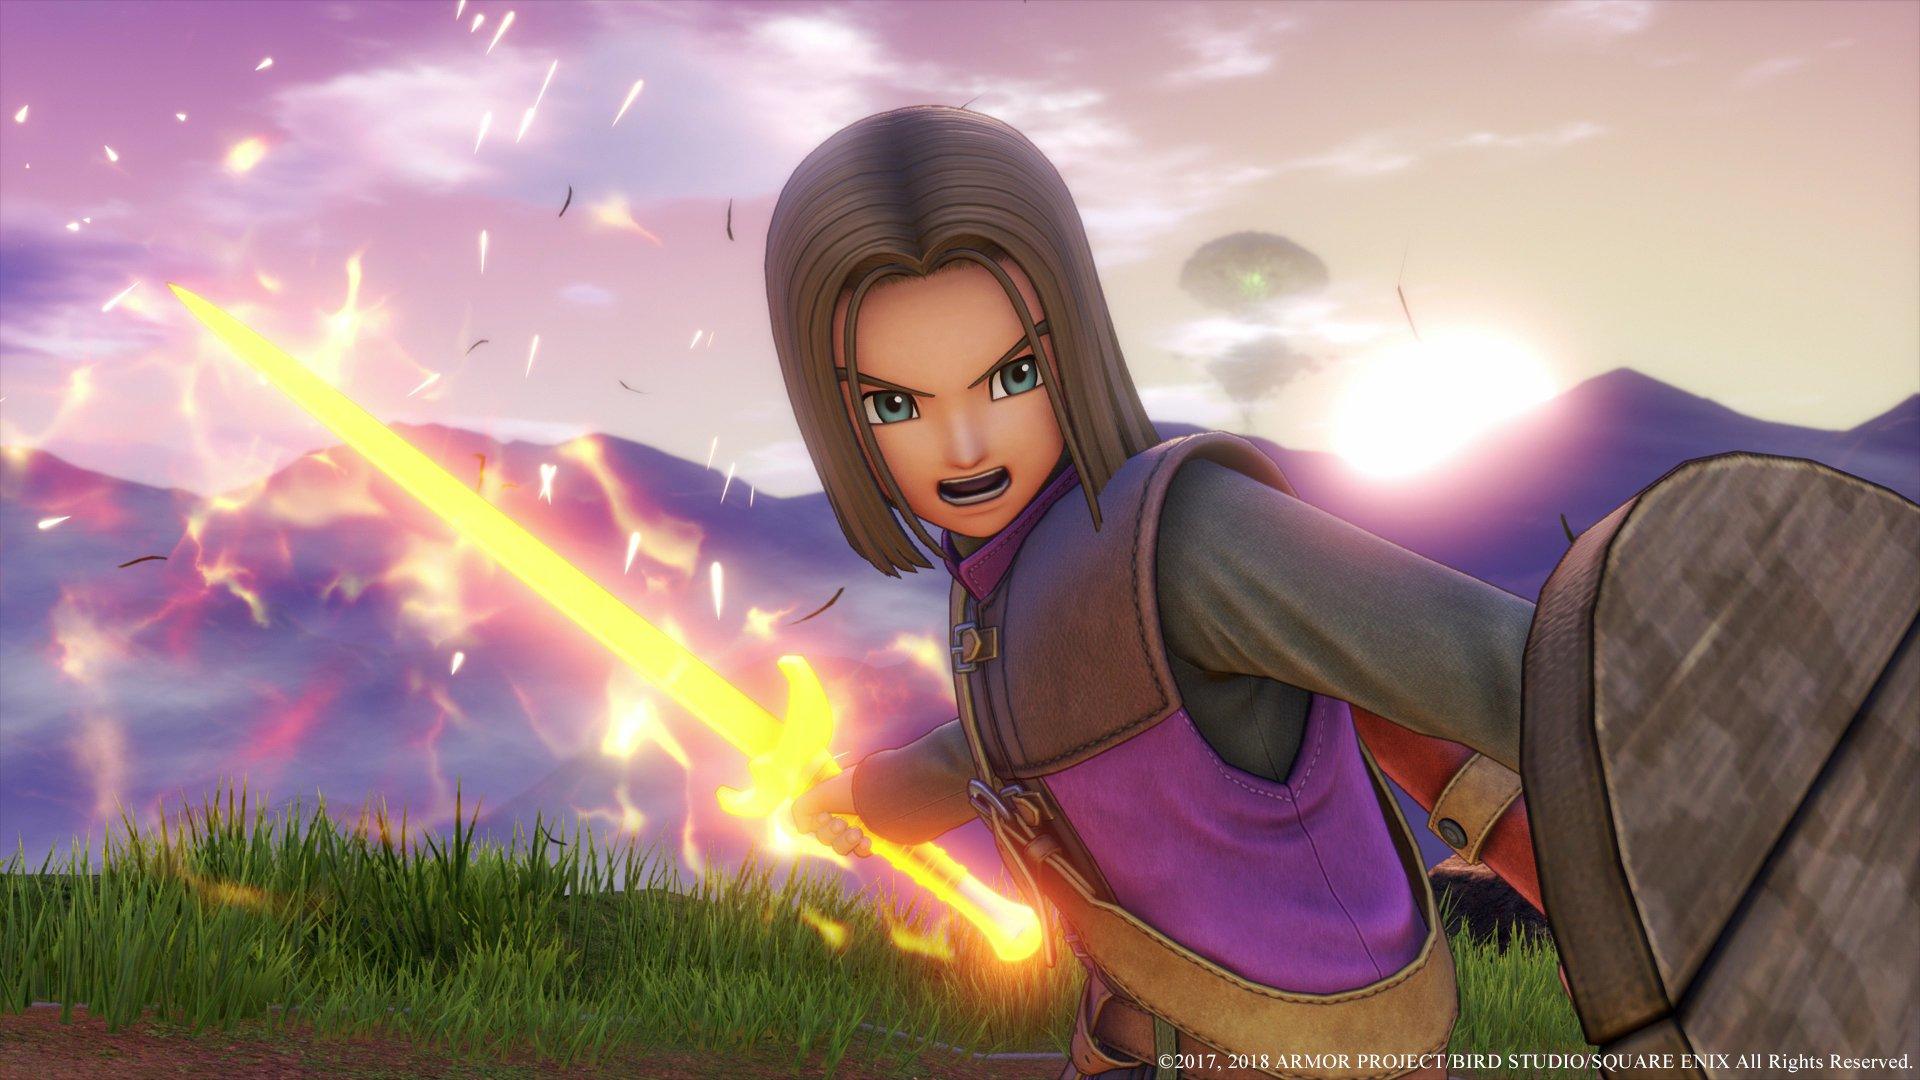 Dragon Quest XI S: Echoes of an Elusive Age - Definitive Edition, Square  Enix, PlayStation 4, [Physical], 662248924205 